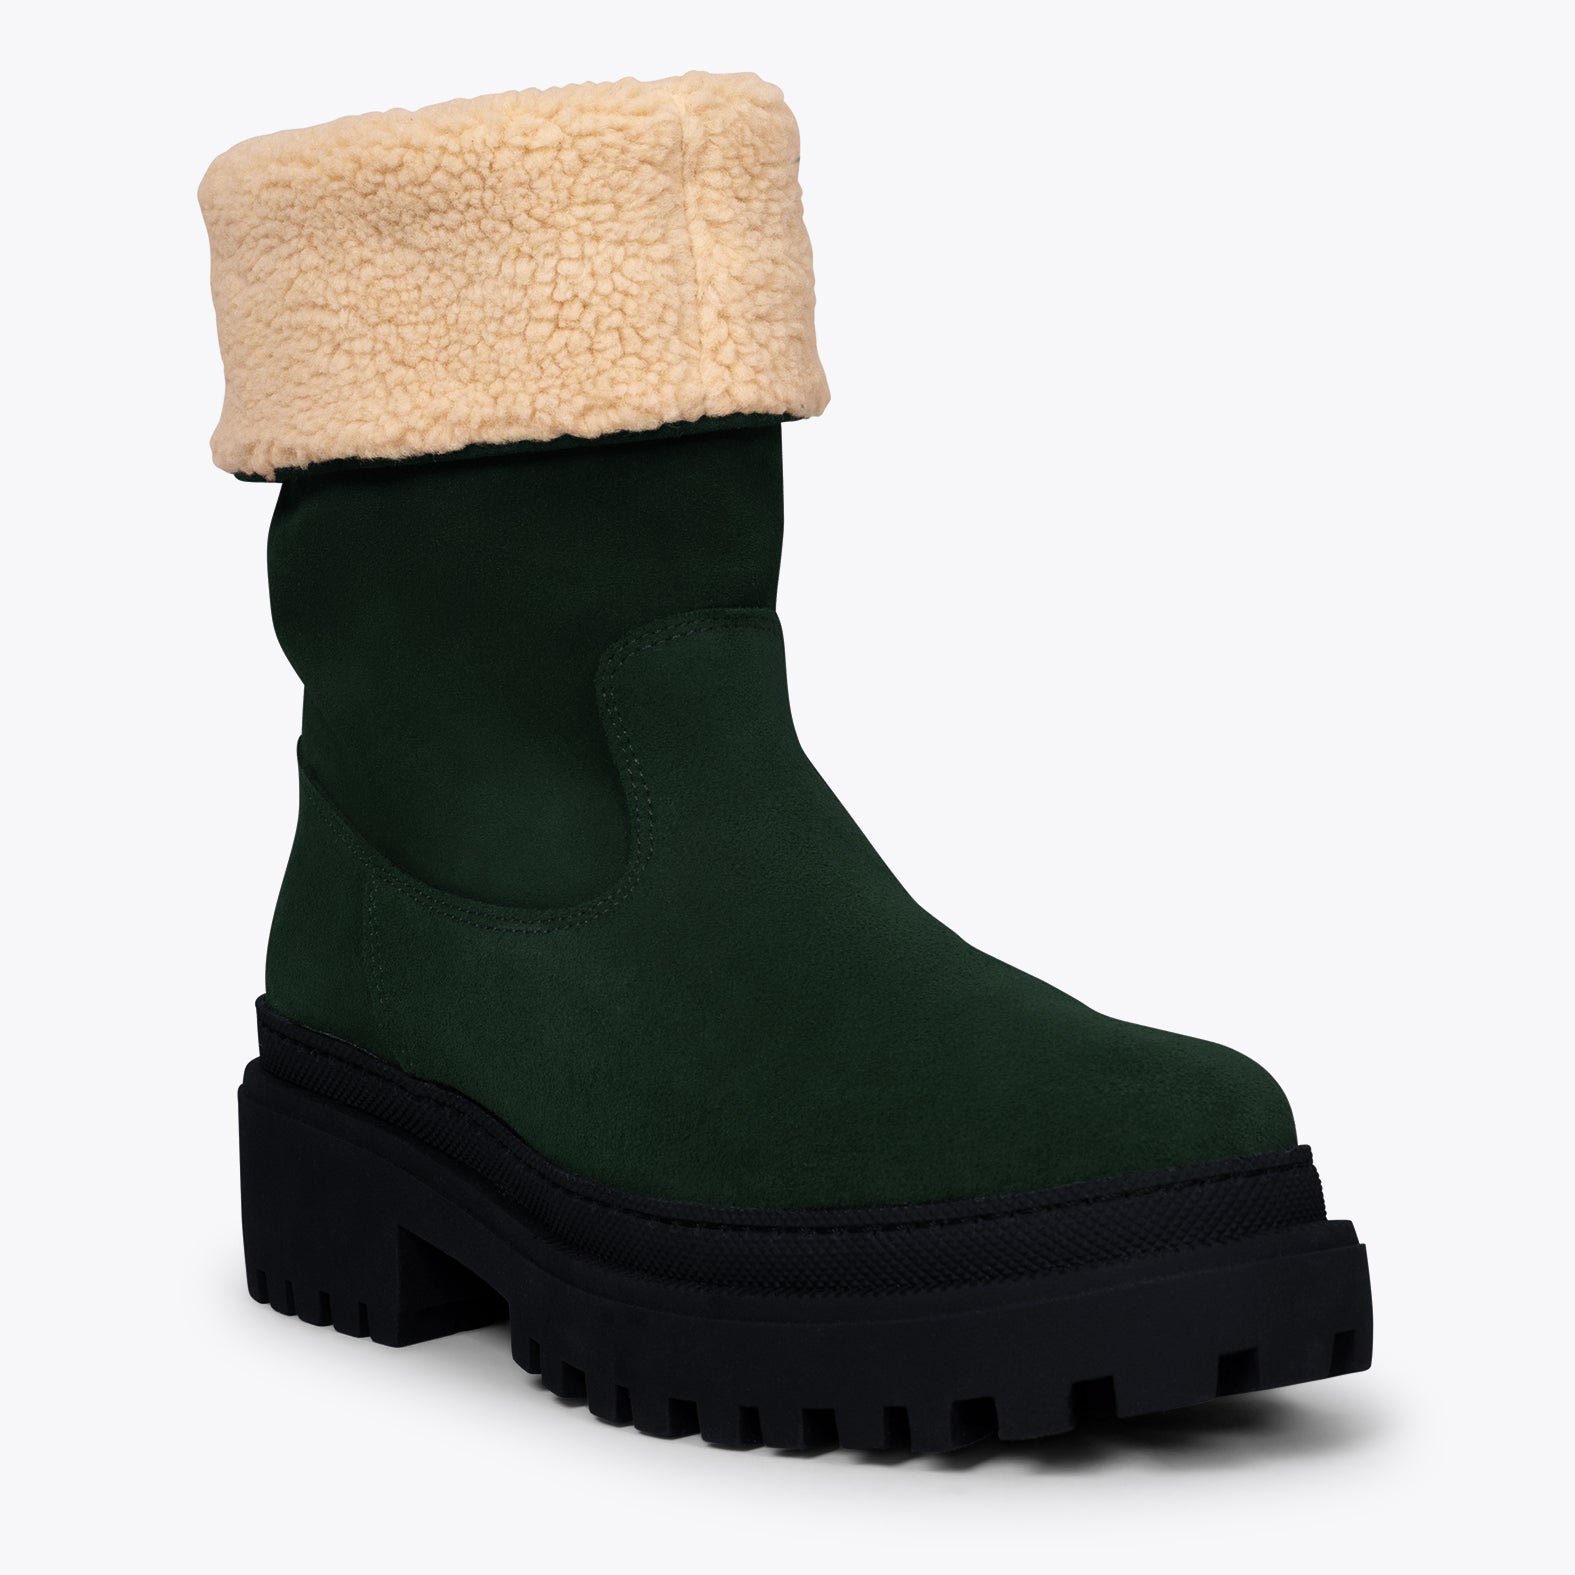 POLAR – GREEN boot crafted in water-repellent suede